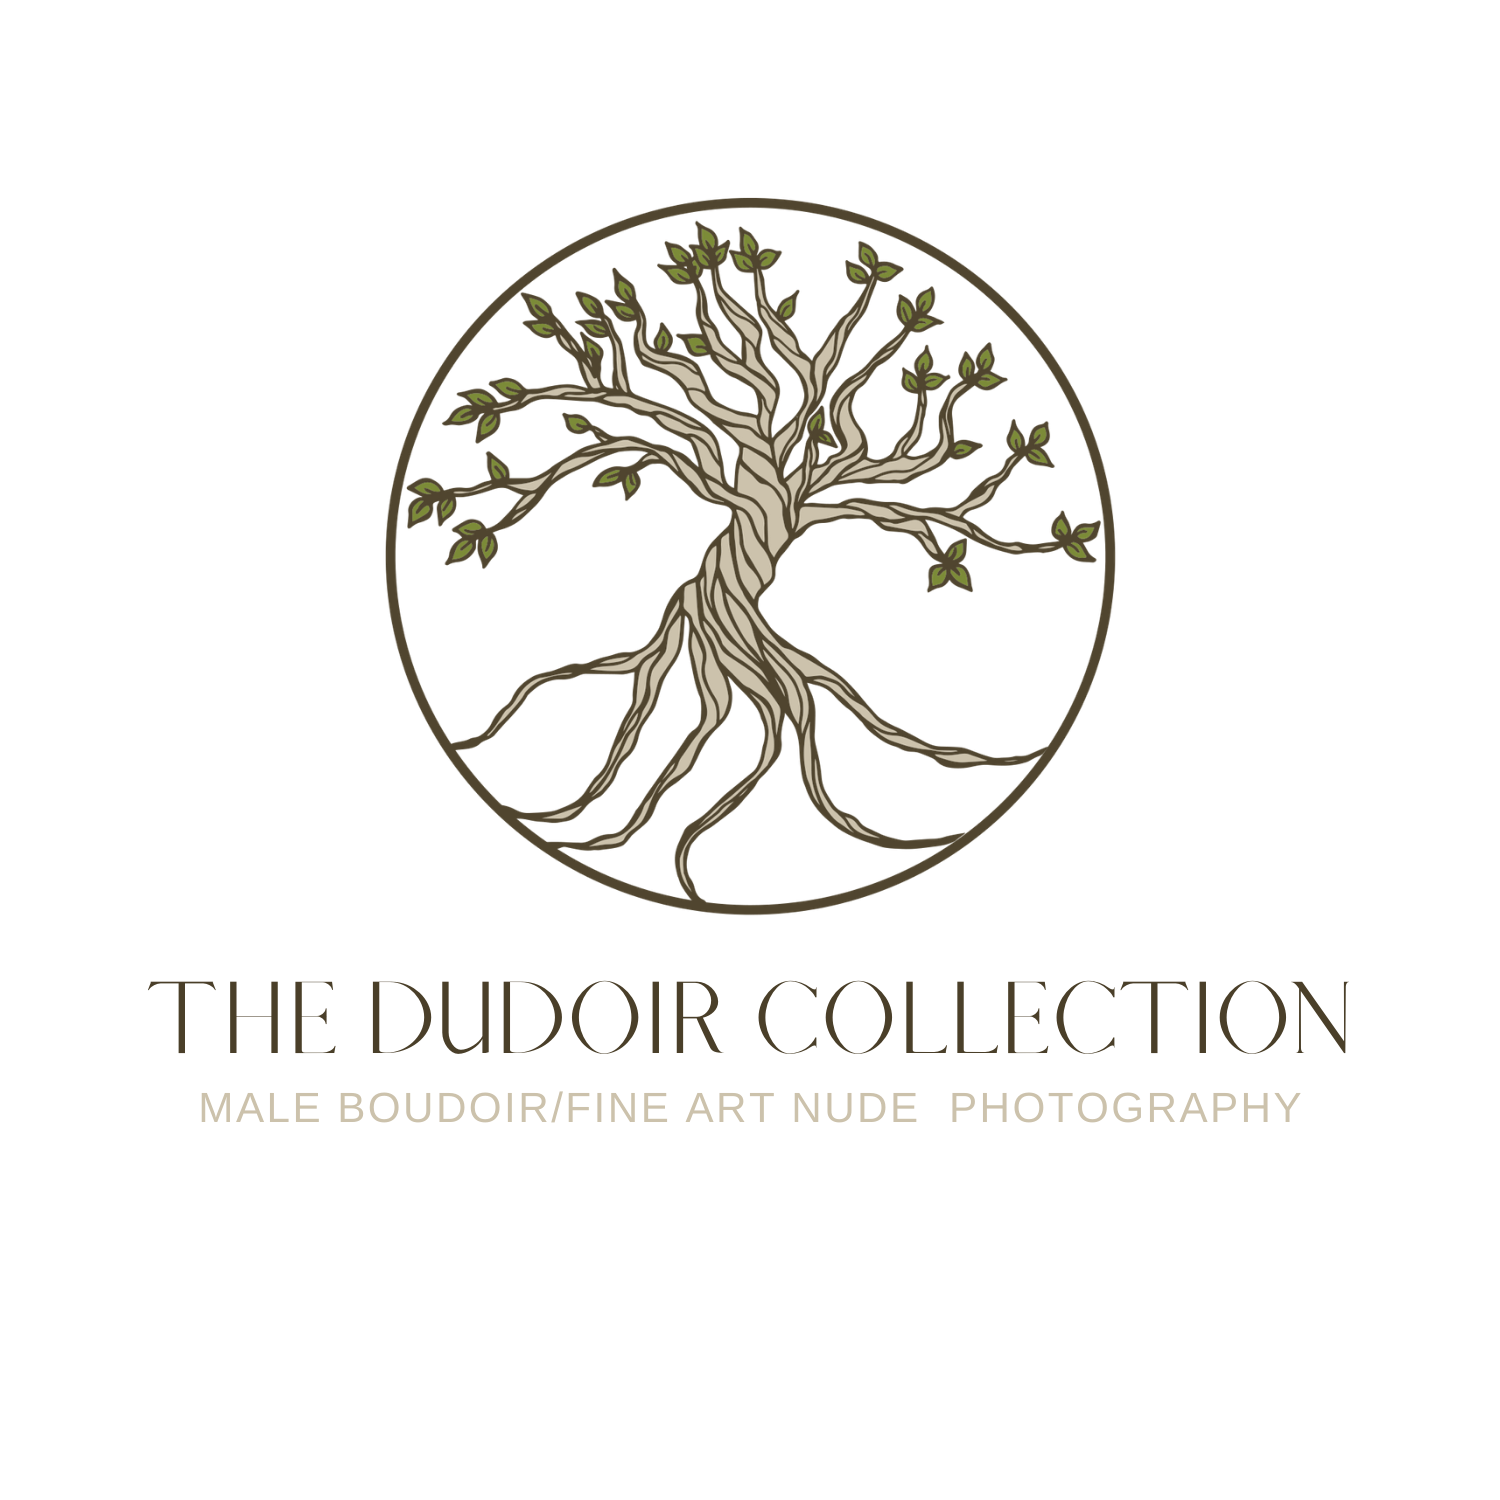 The Dudoir Collection